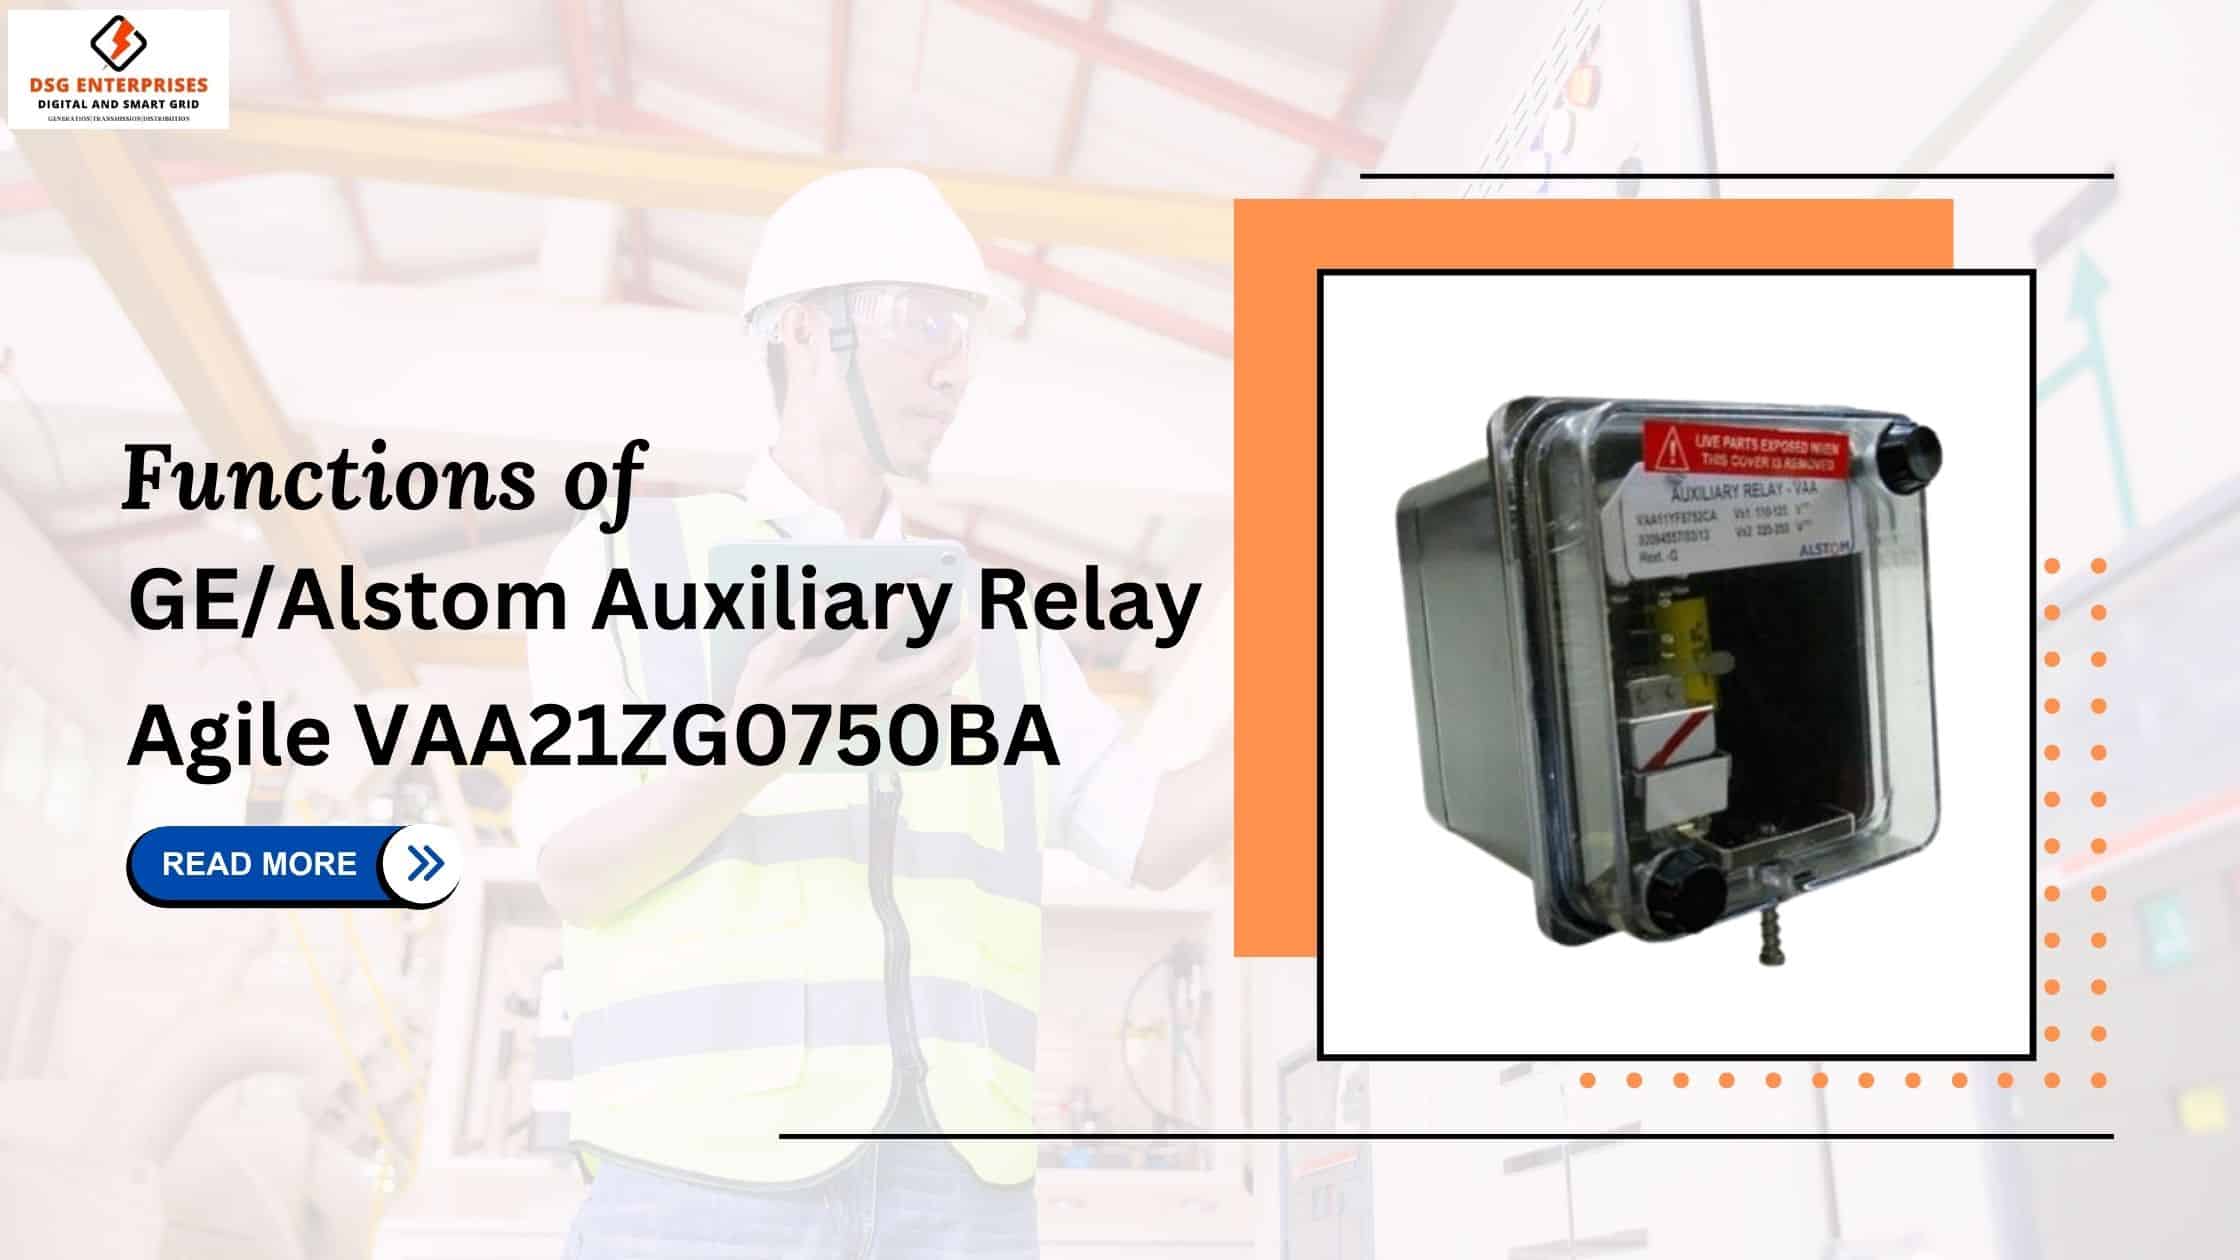 You are currently viewing Functions of GE/Alstom Auxiliary Relay Agile VAA21ZG0750BA